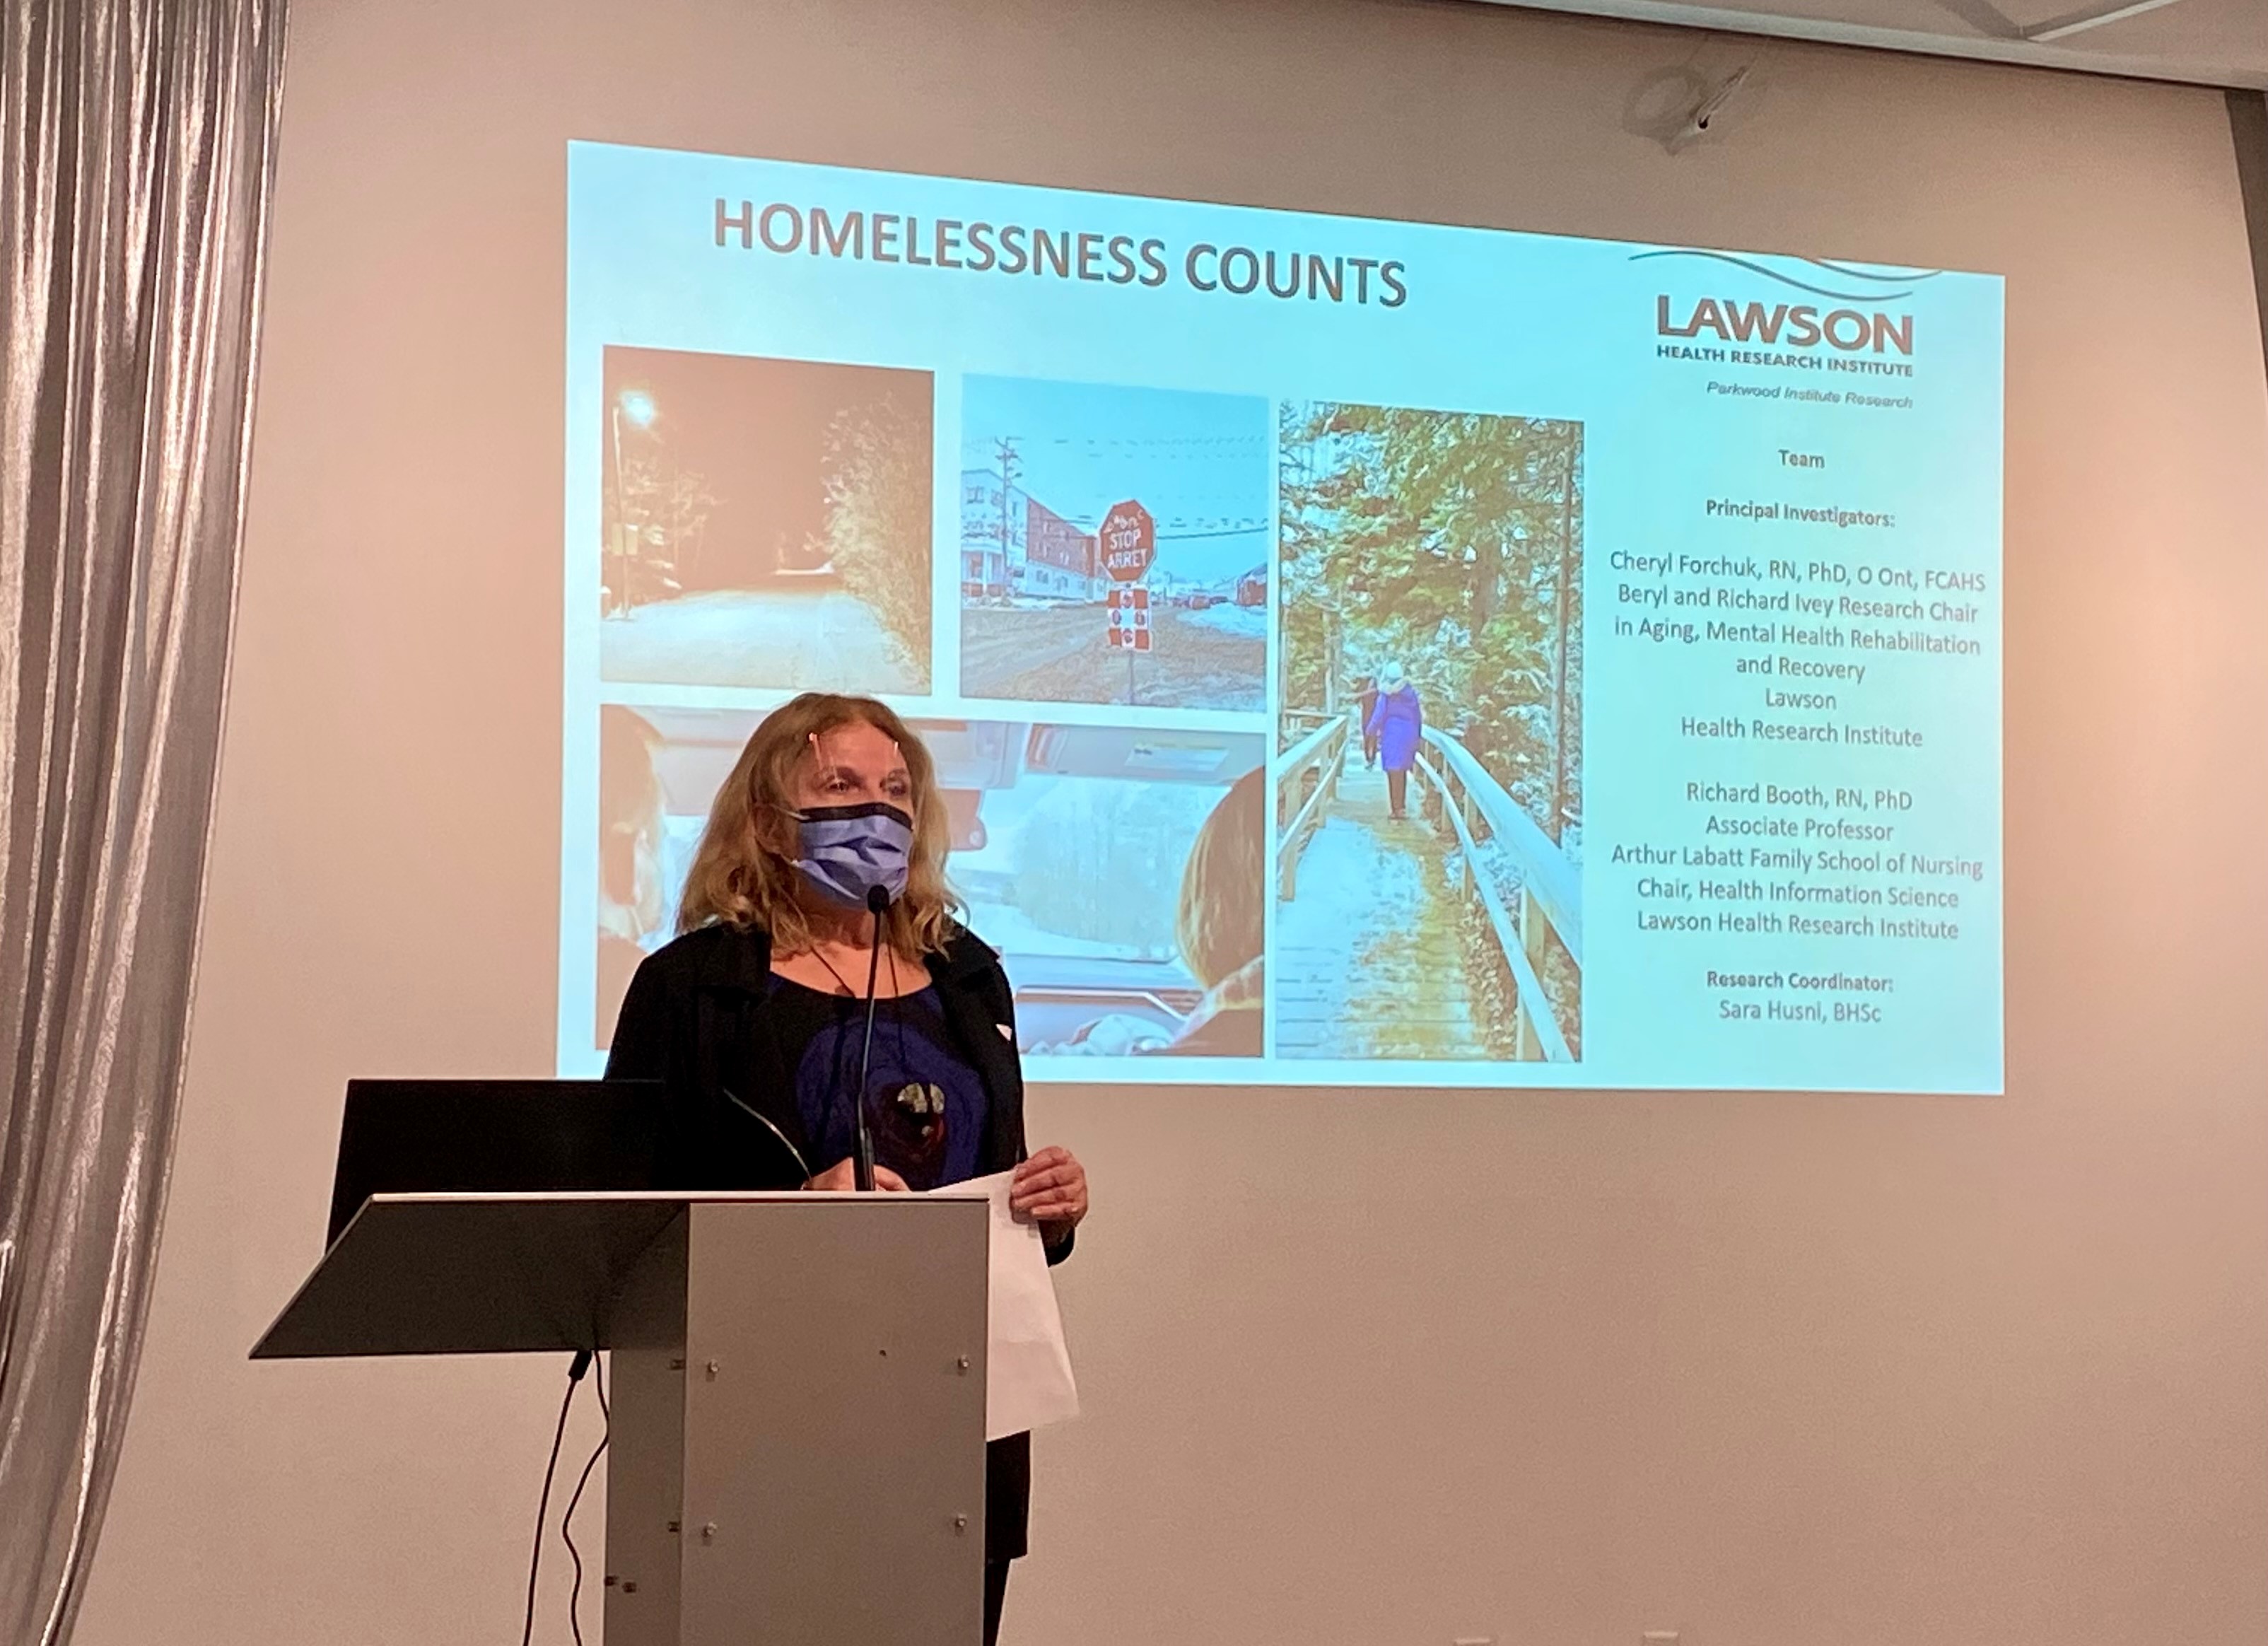 Dr. Cheryl Forchuk at the homelessness counts forum